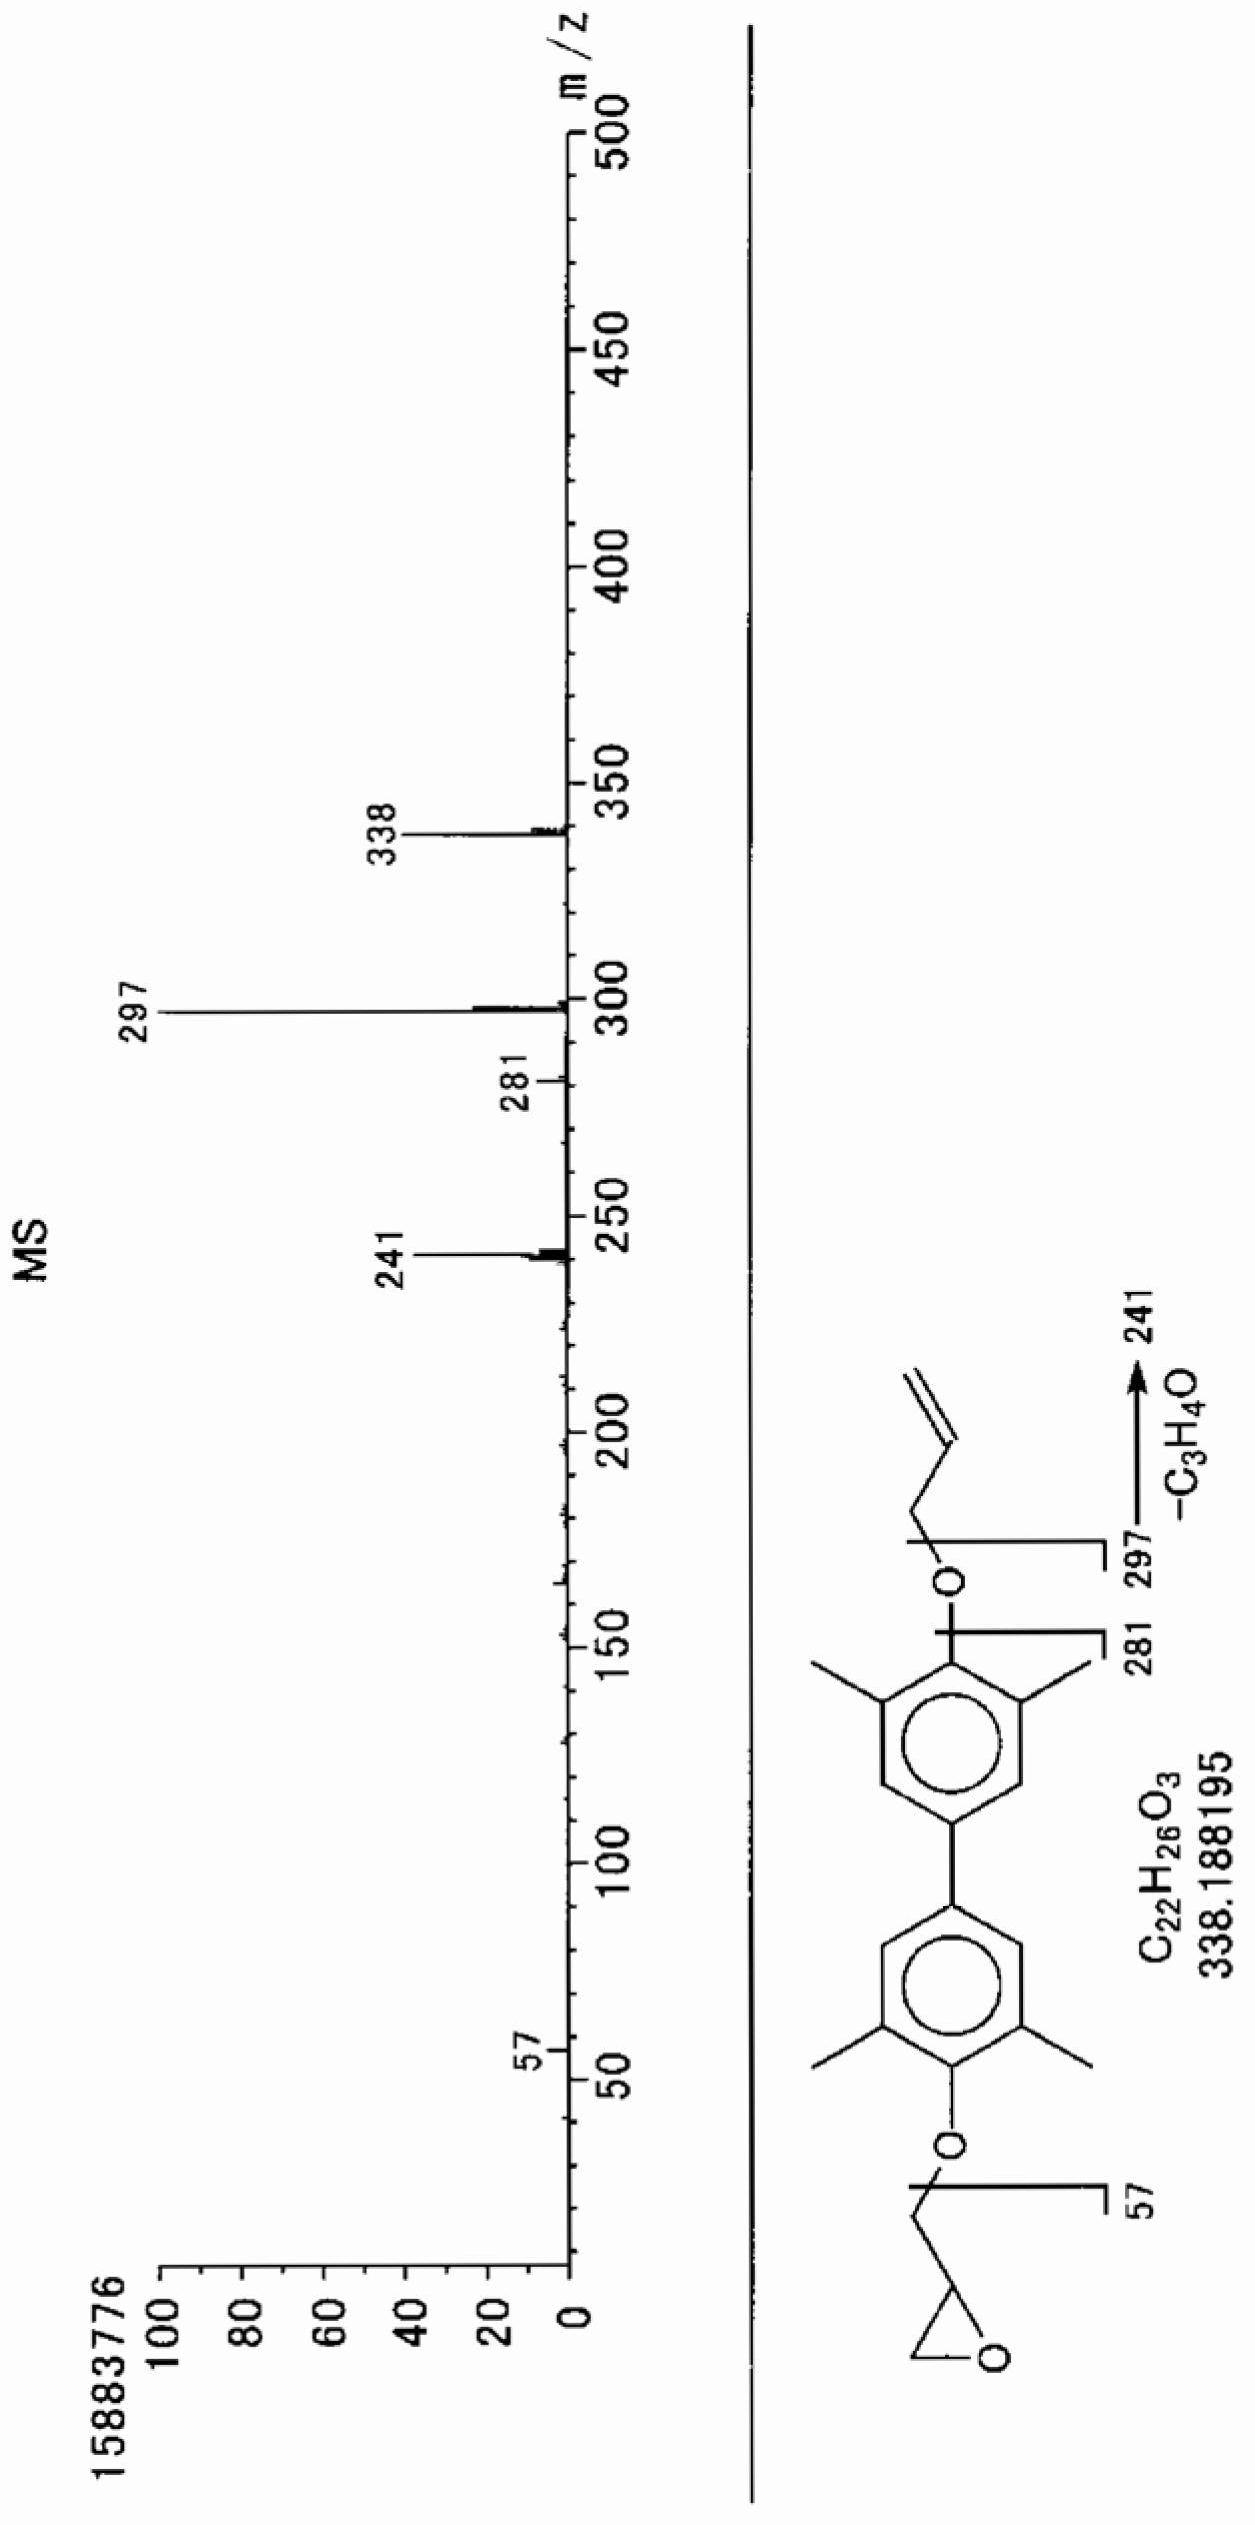 Process for production of glycidyl ether compounds, and monoallyl monoglycidyl ether compound